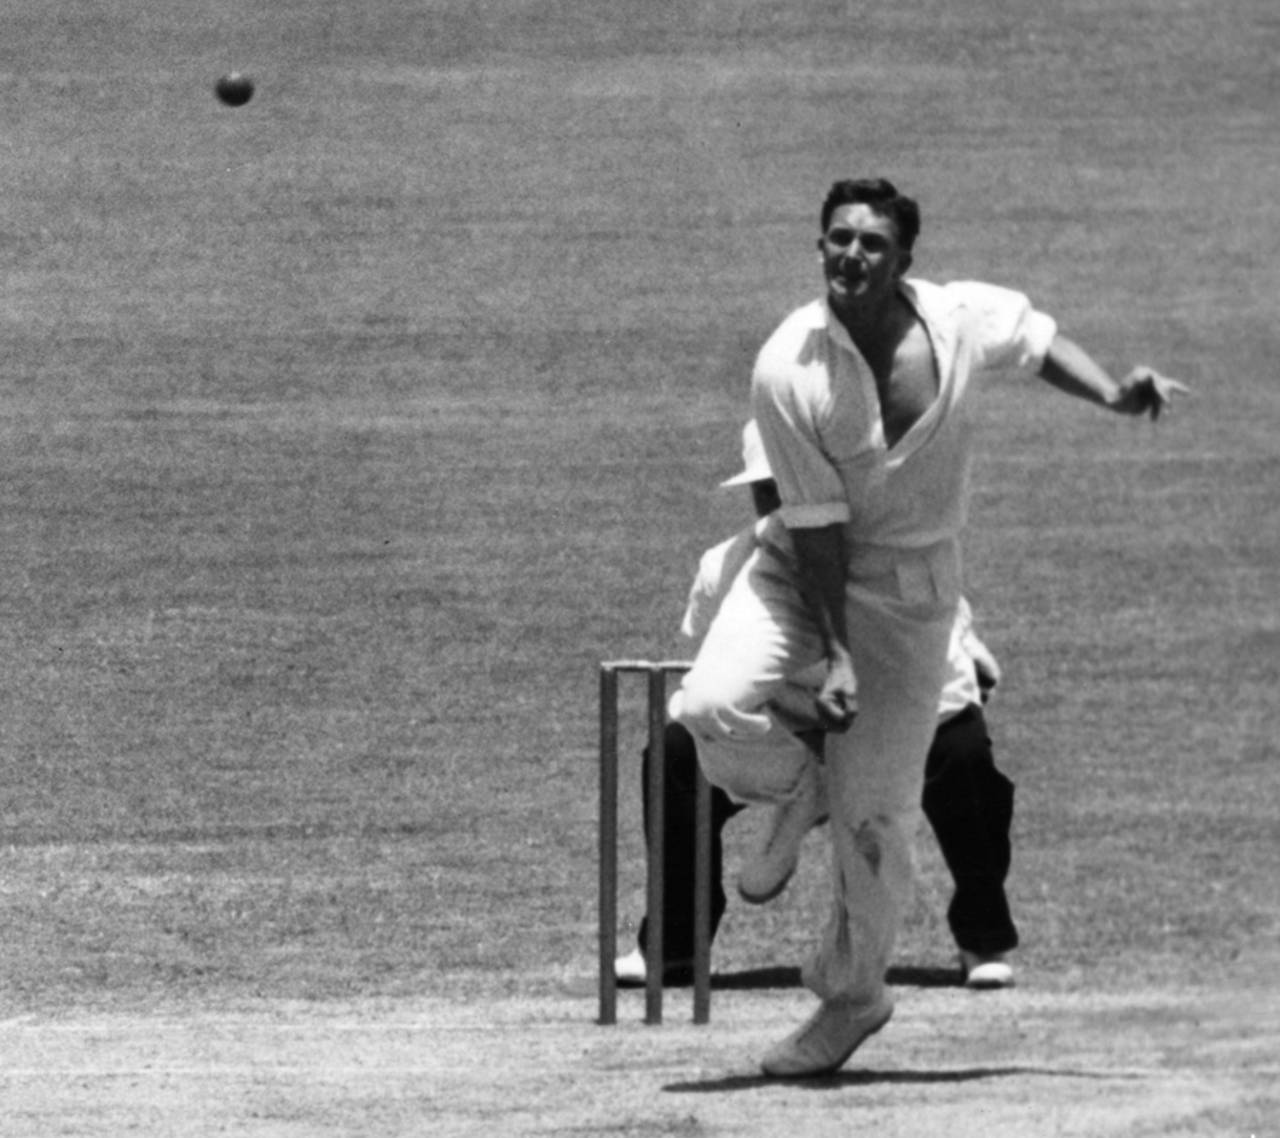 Richie Benaud bowls during a match in Sydney, January 1, 1958